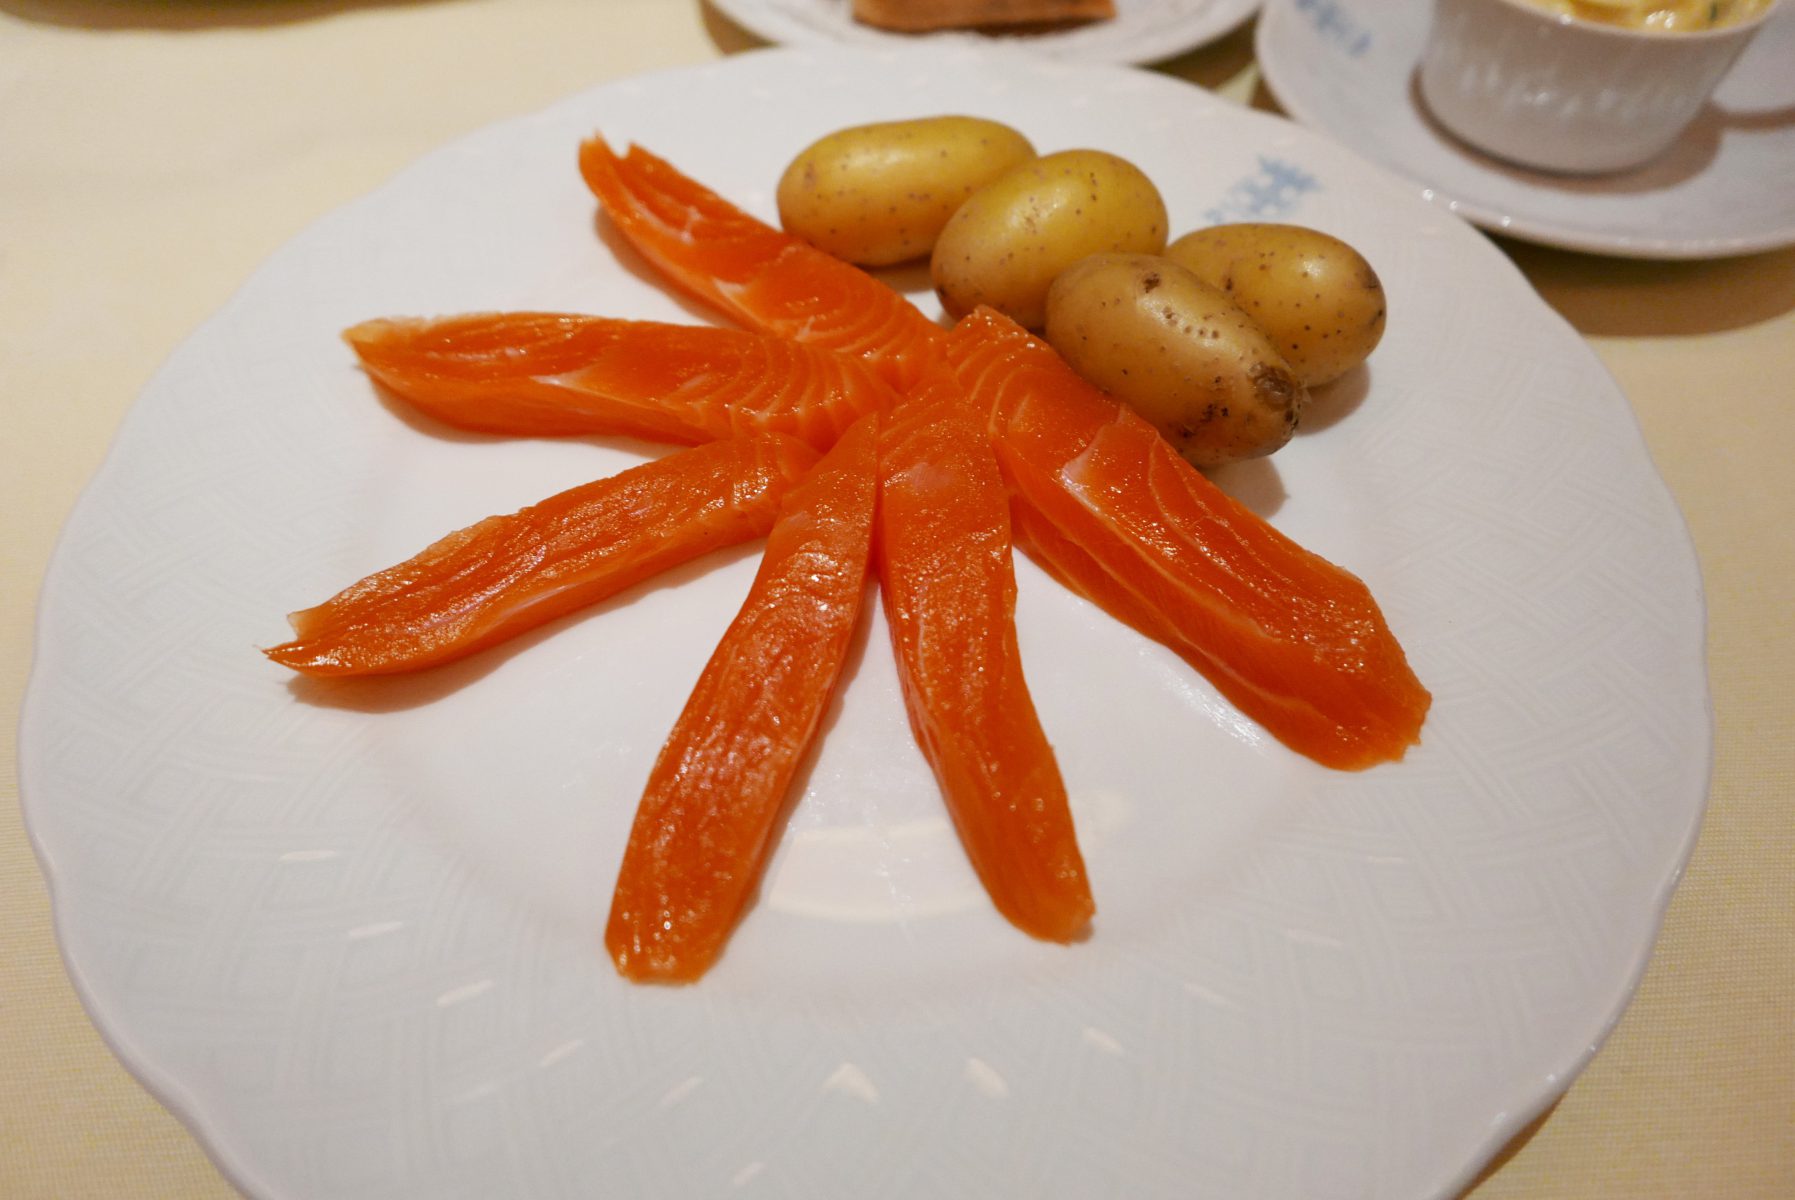 Salt cured salmon with potatoes